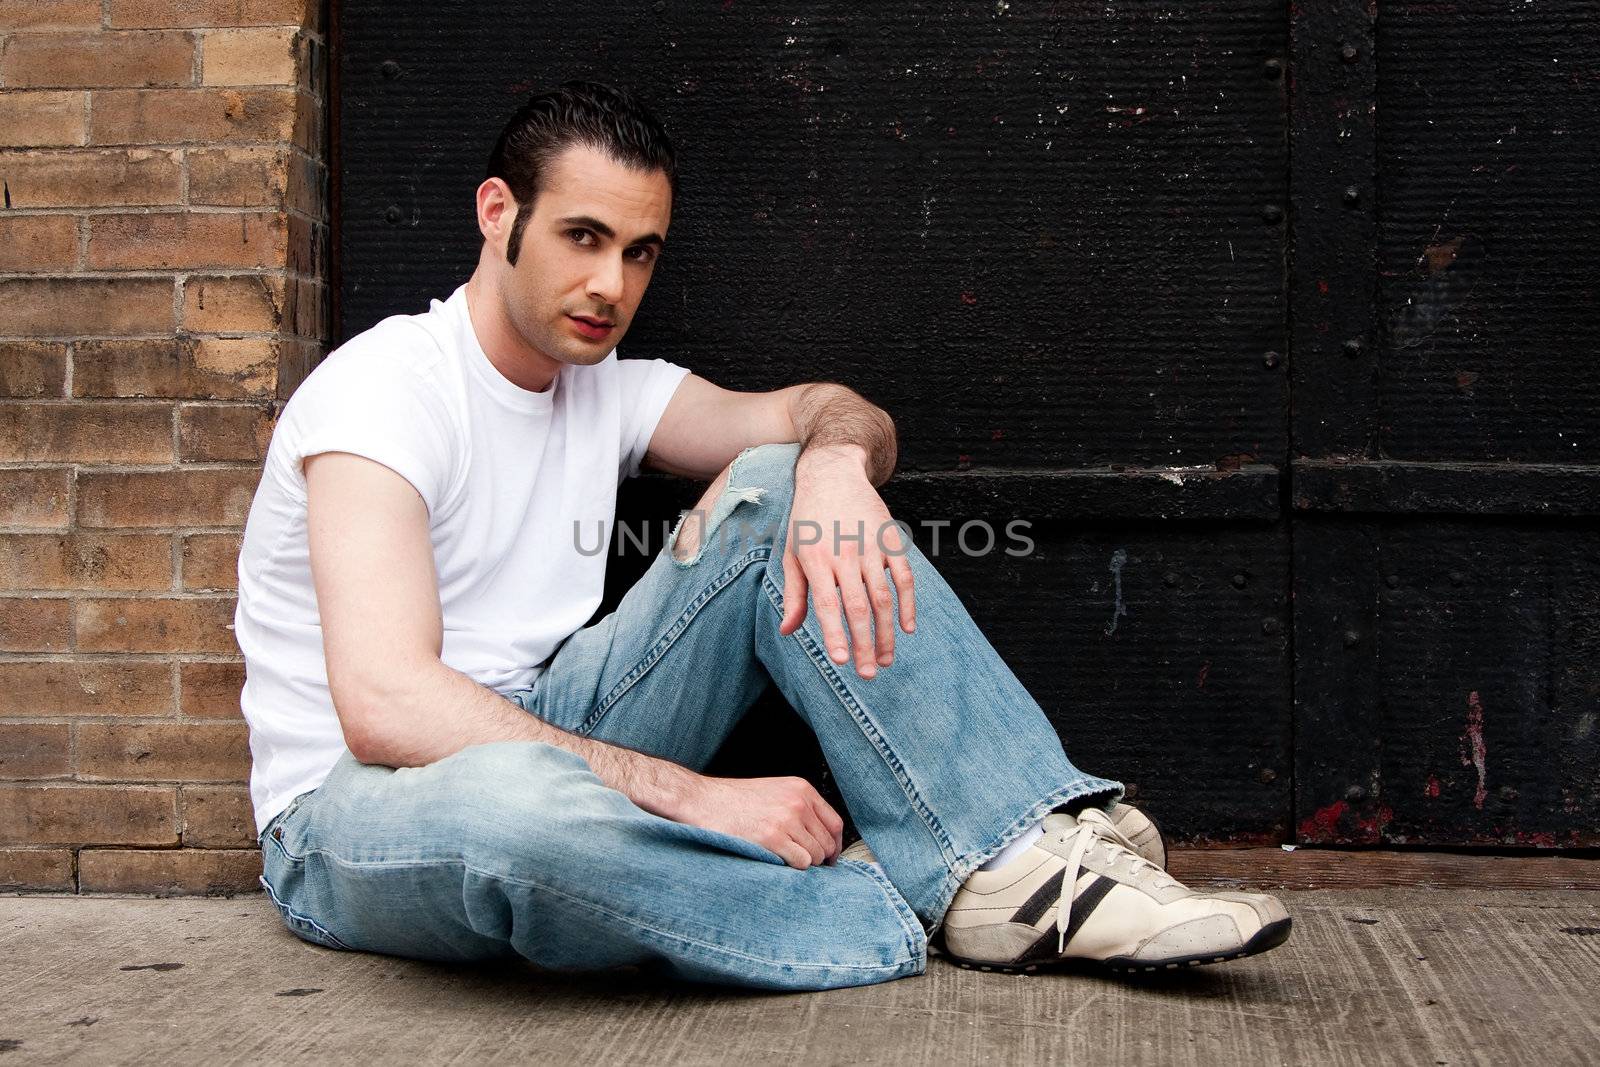 Handsome Caucasian man with sideburns dressed in white shirt and blue jeans sitting on concrete floor in front of black metal garage door